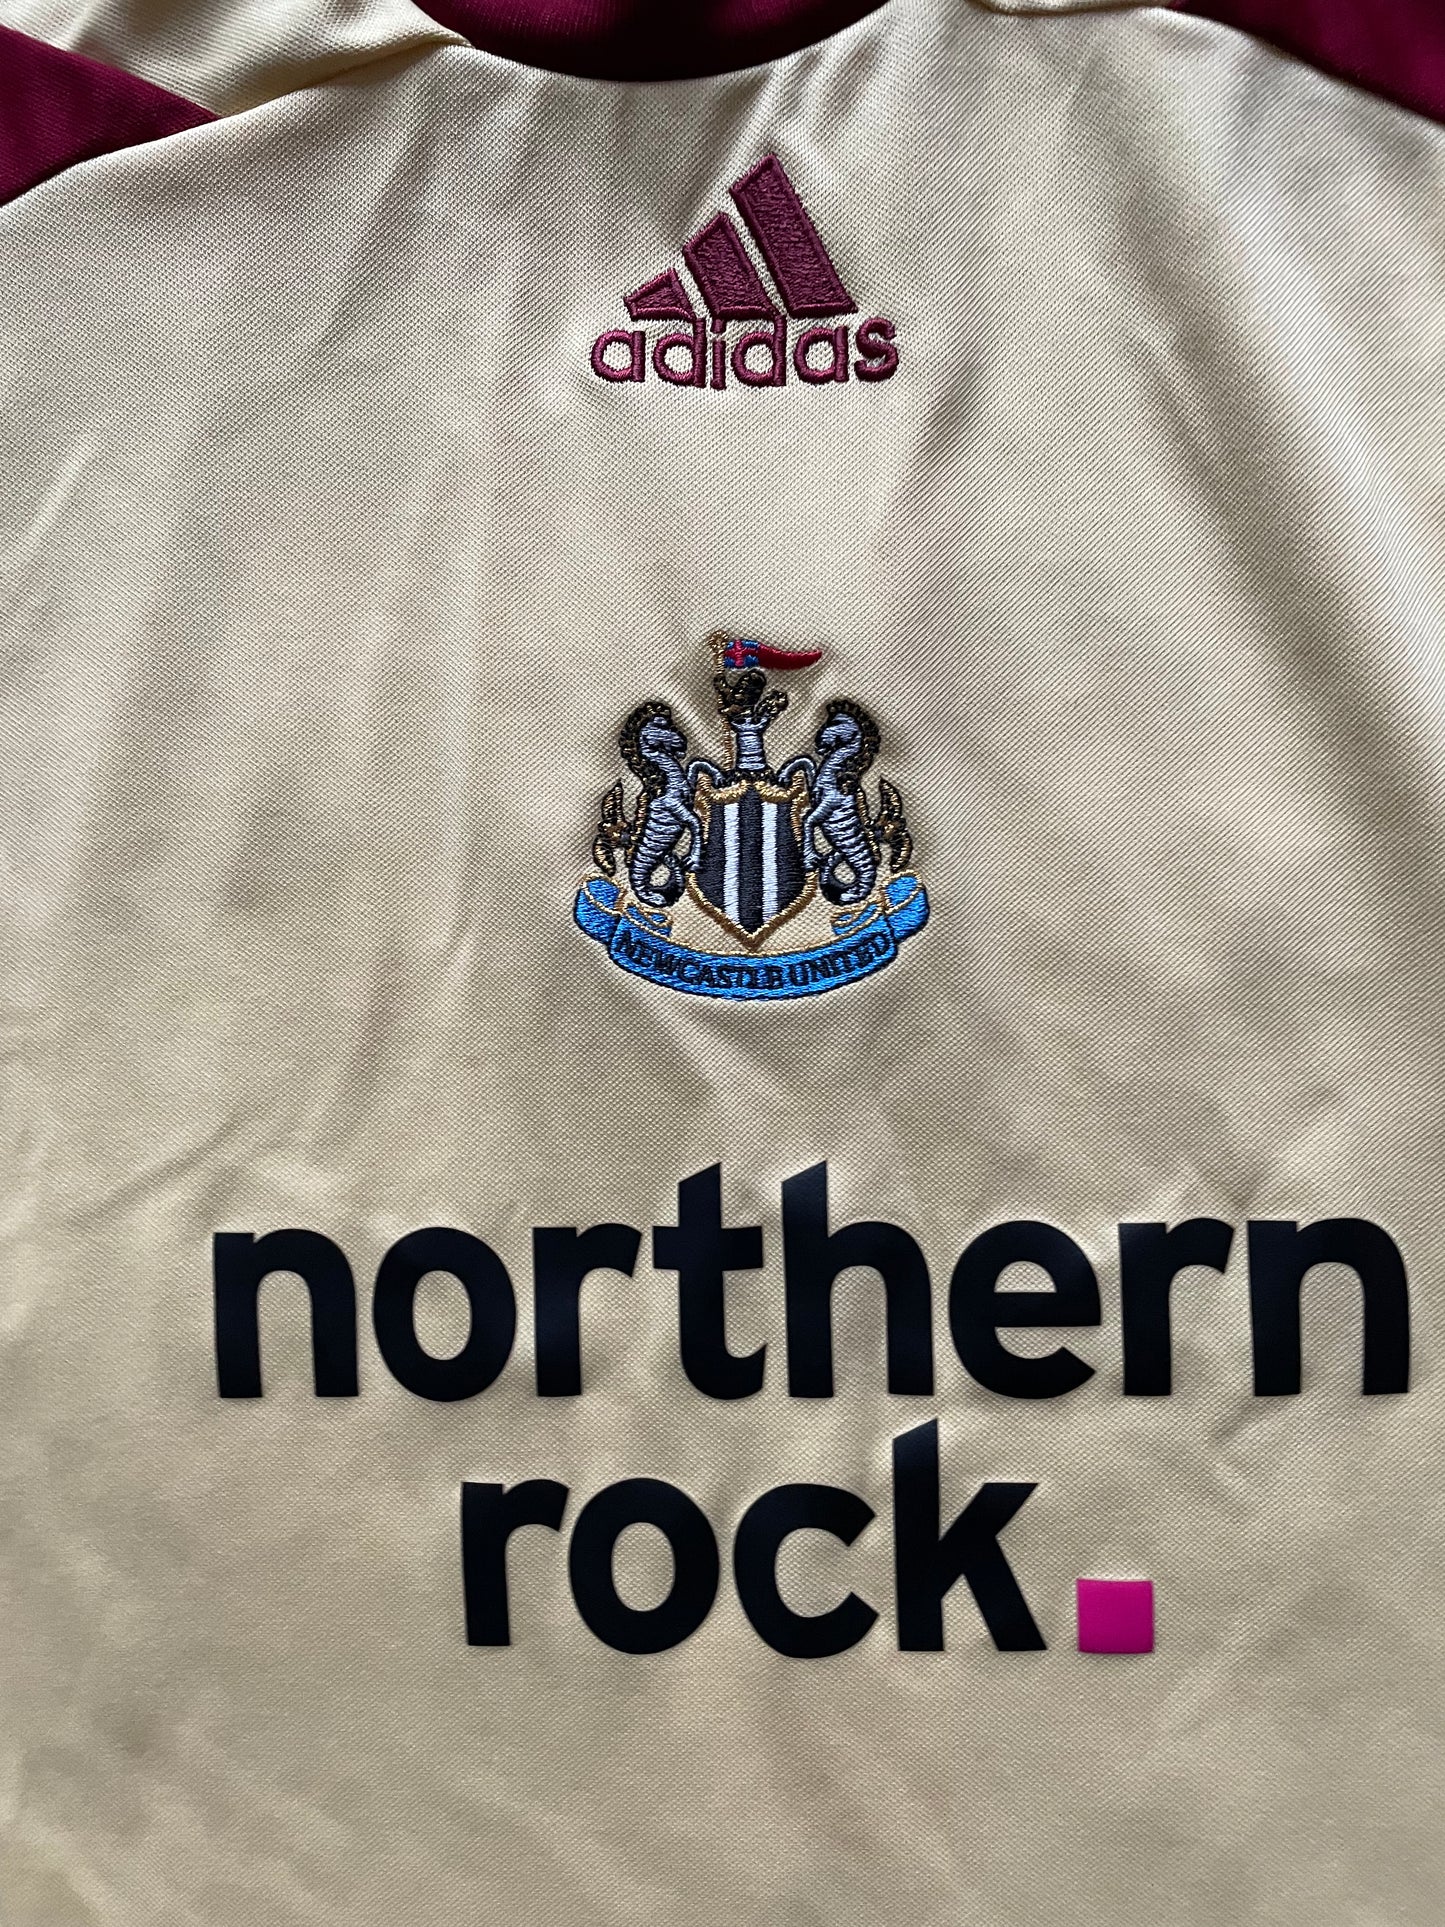 Newcastle 2007 Goalkeeper Shirt (very good) Adults Small/Youth XL 32/34 164